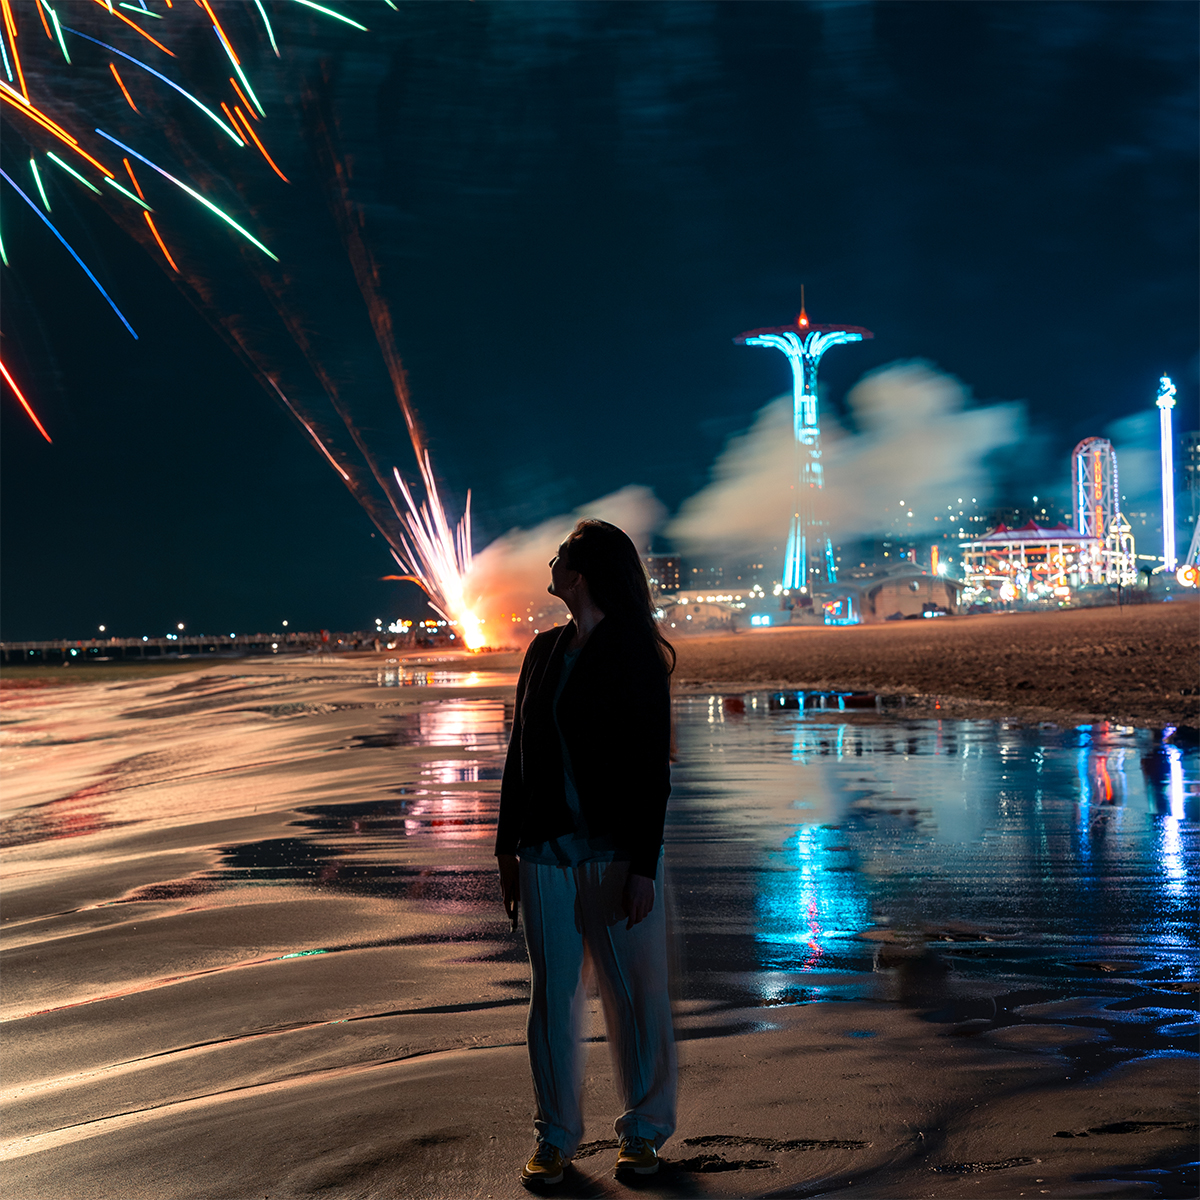 Coney Island has a fireworks display every Friday in the summer.